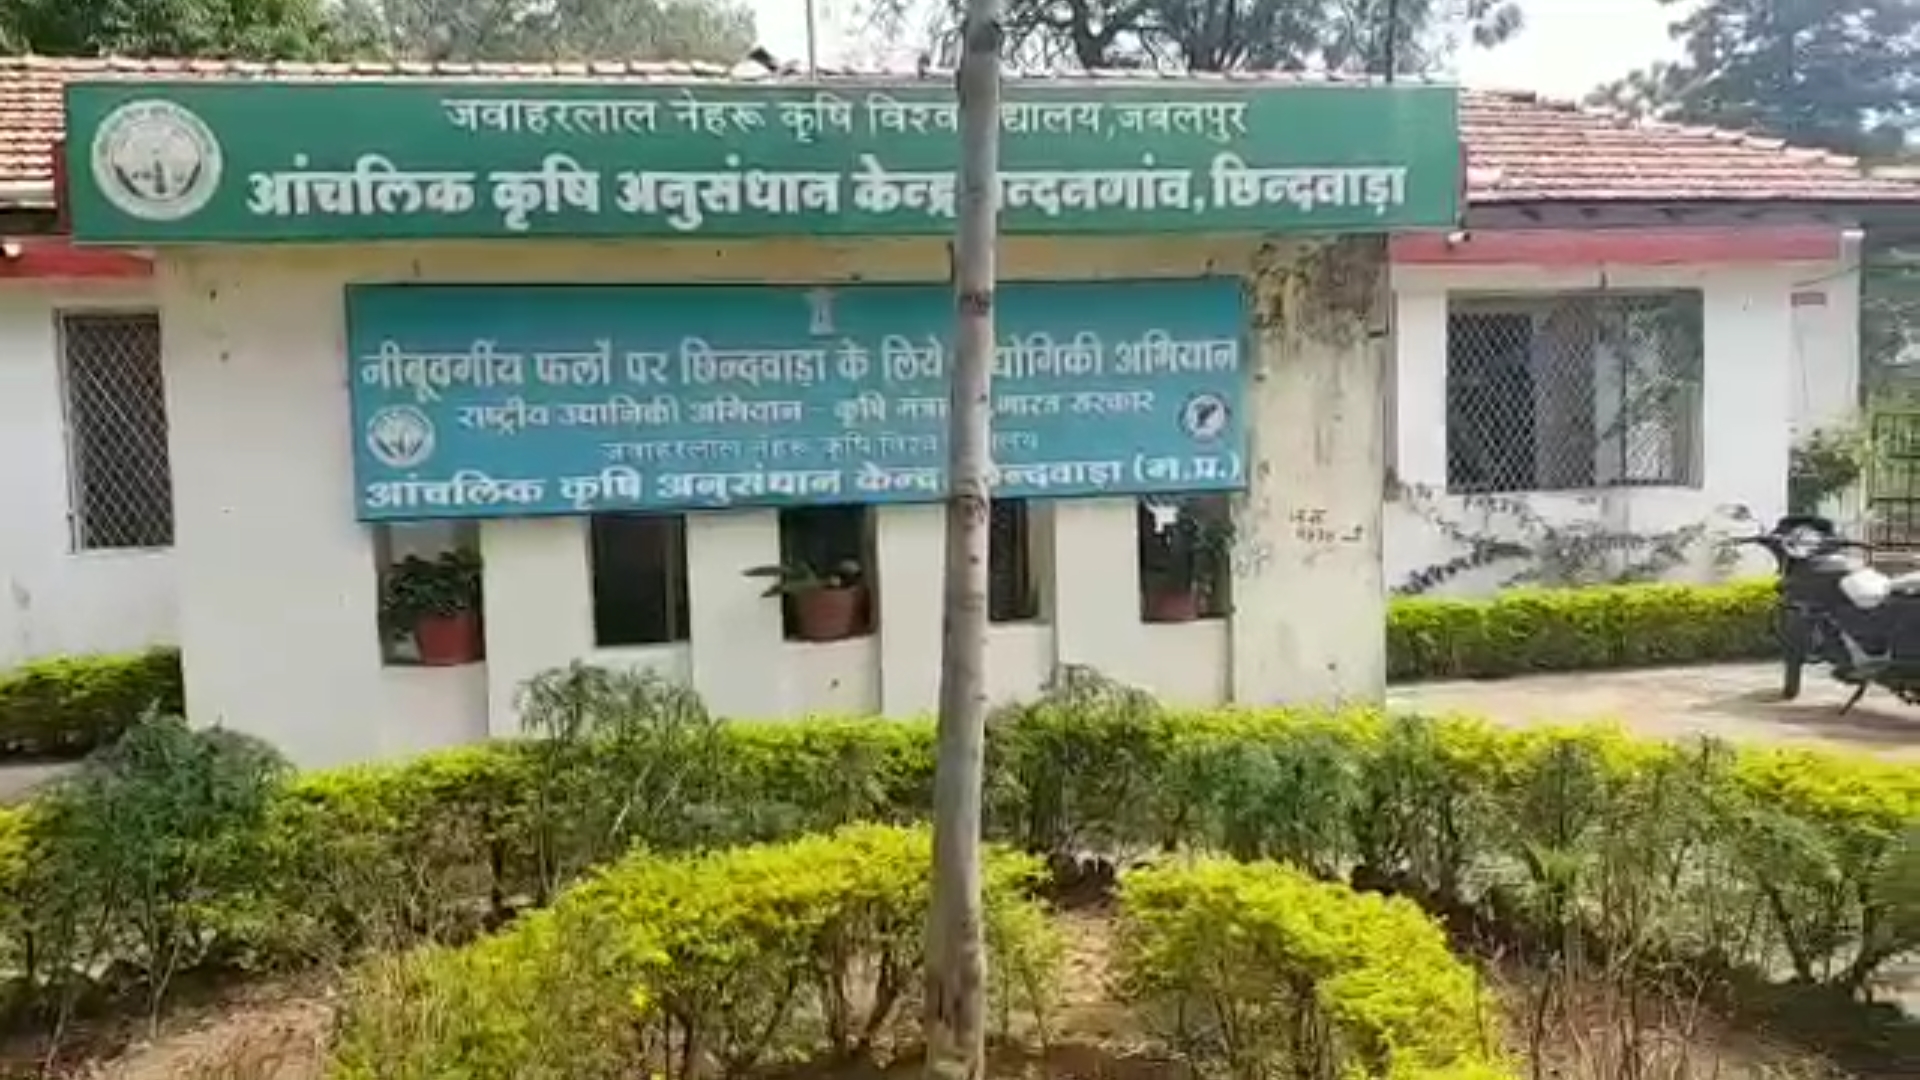 Agricultural Research Center Chhindwara